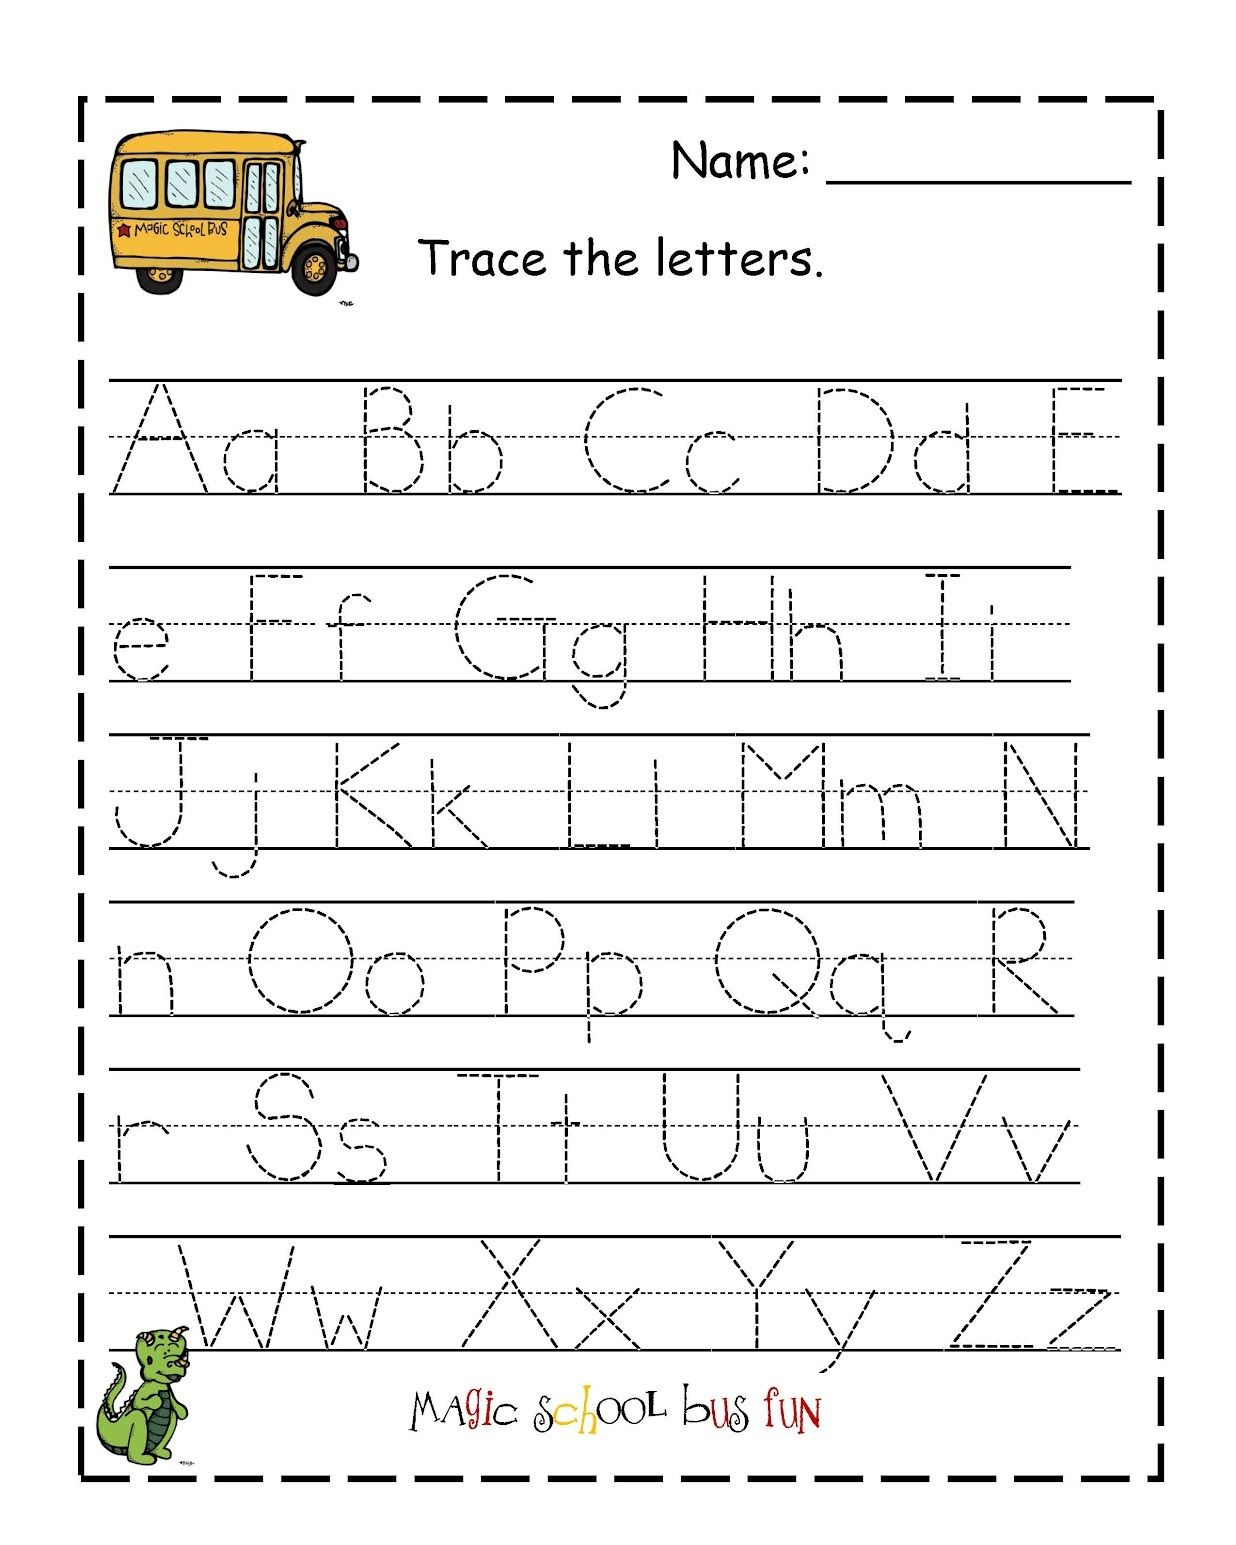 Coloring Book : Tracing Letter Worksheets Preschool Free for Tracing Letters Worksheets Preschool